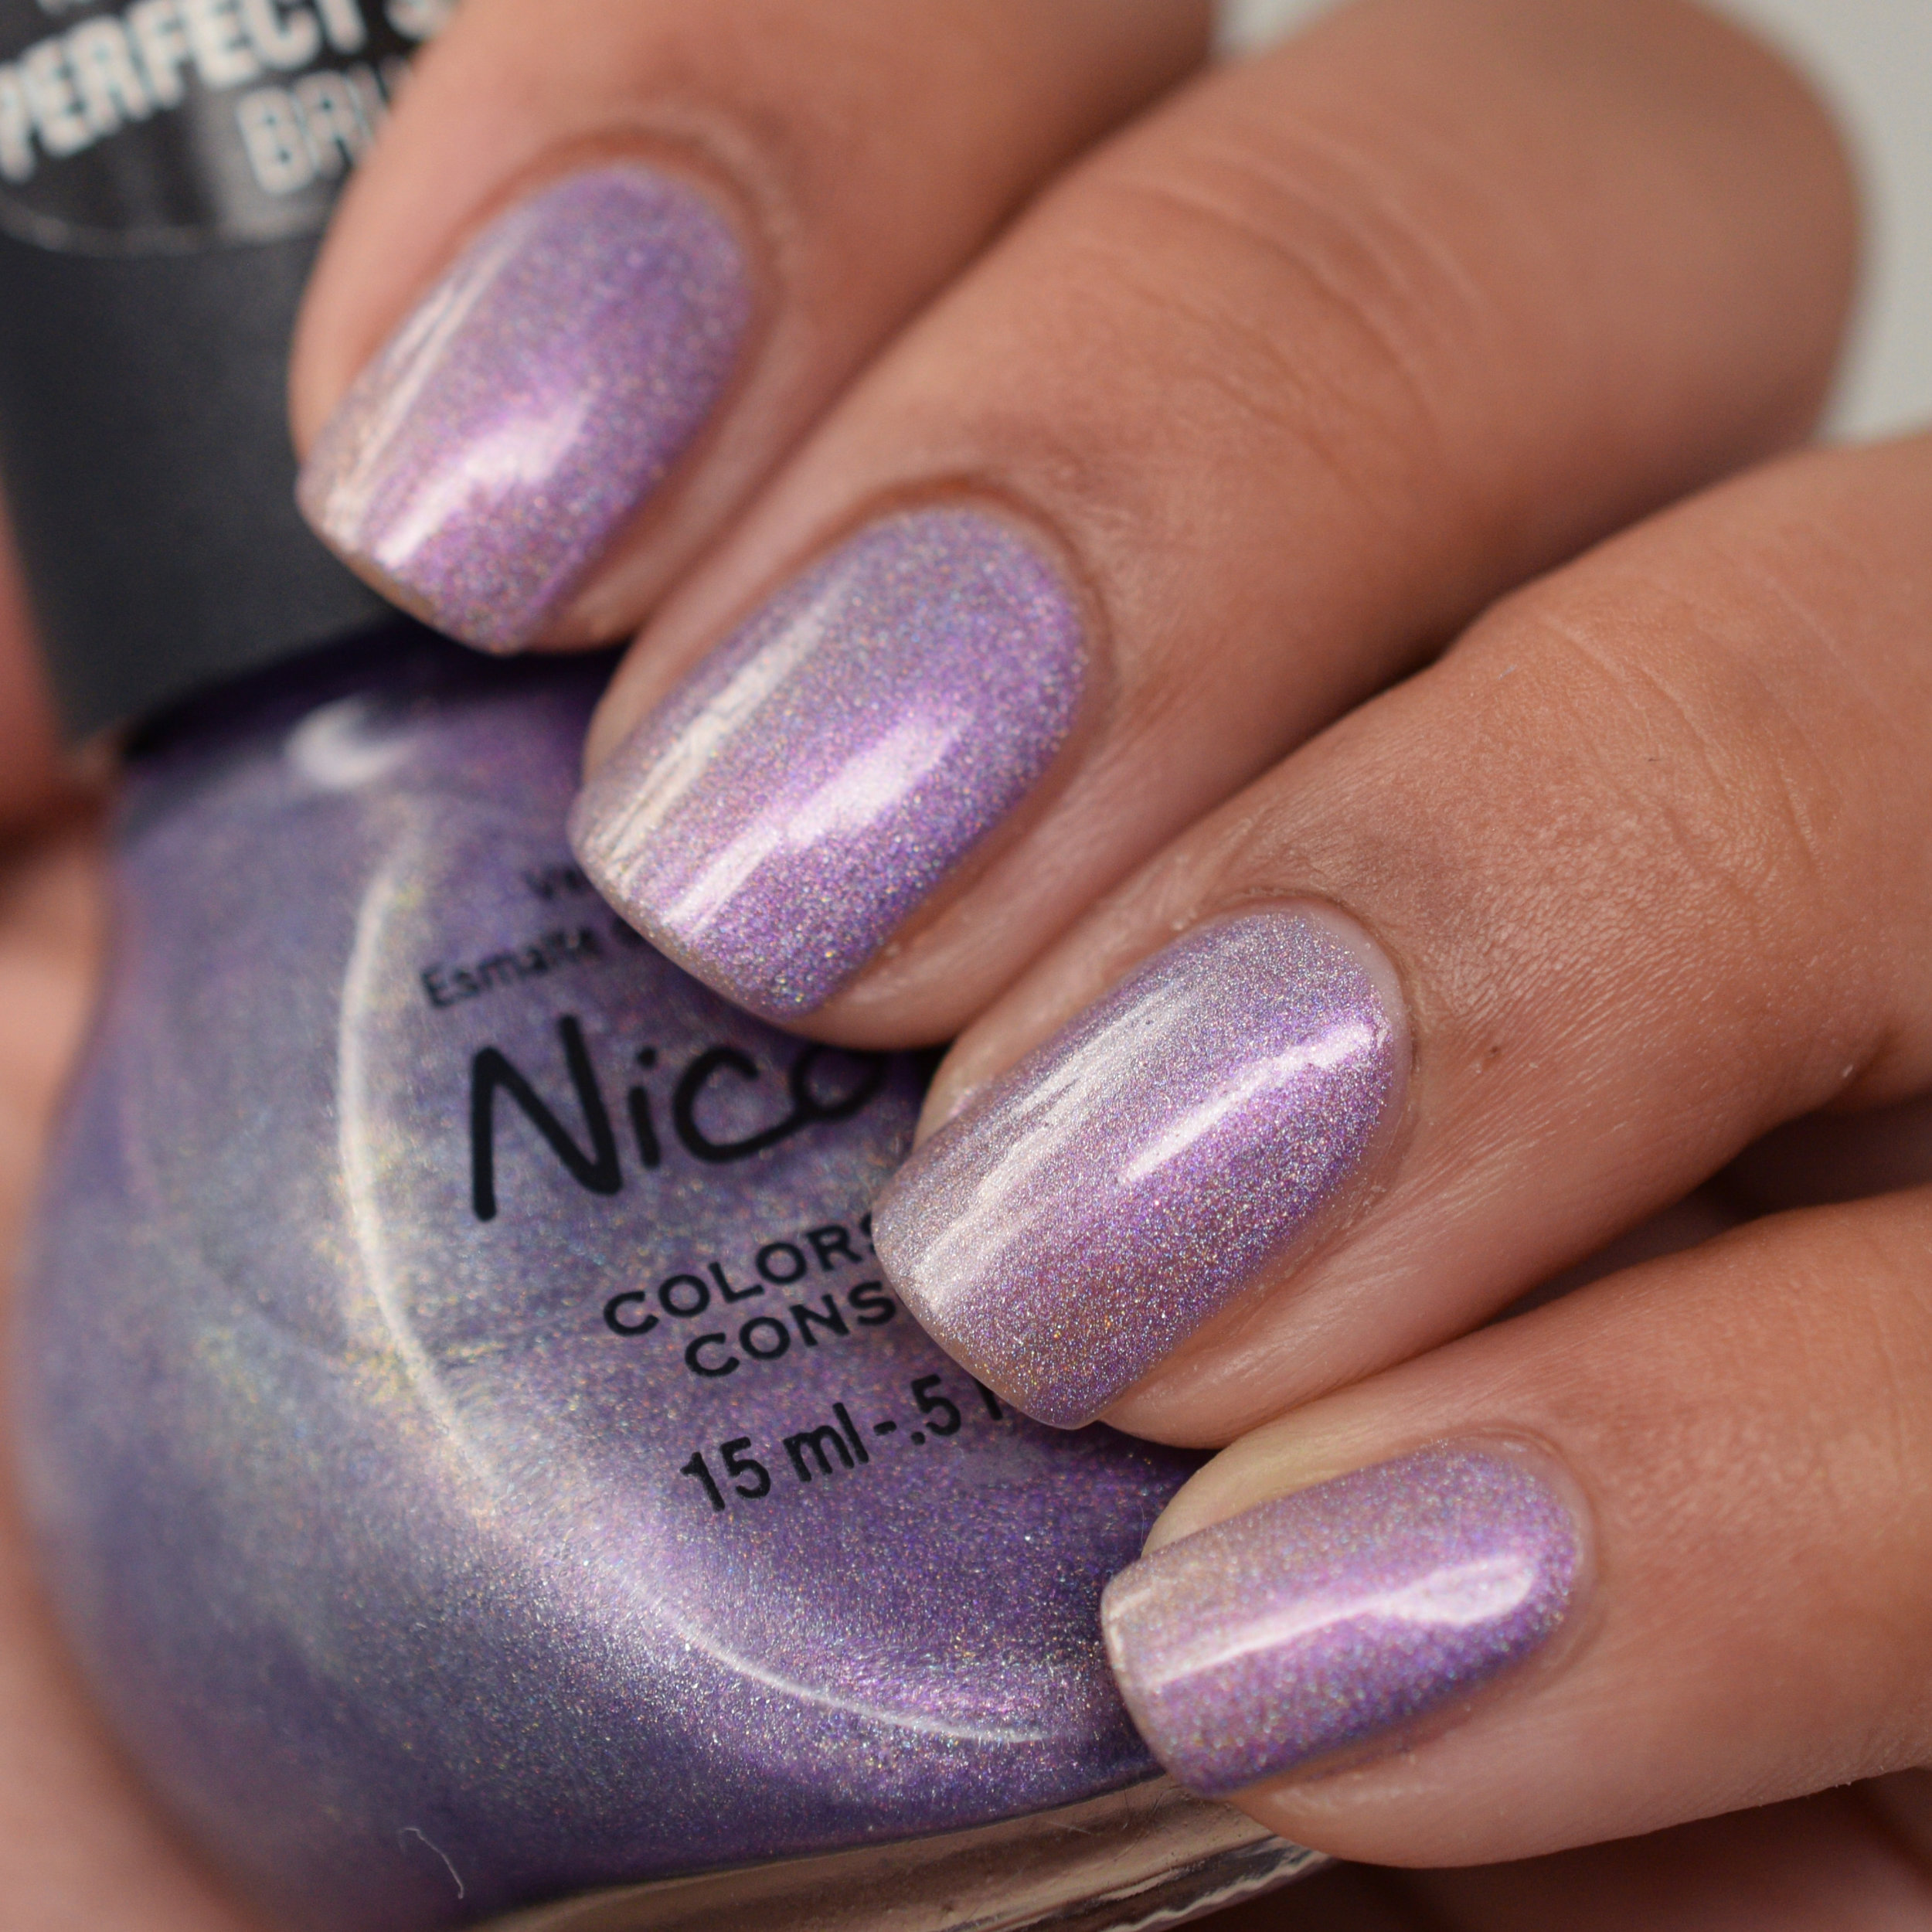 Nicole by OPI holiday holographic - Twinkle Periwinkle.jpg